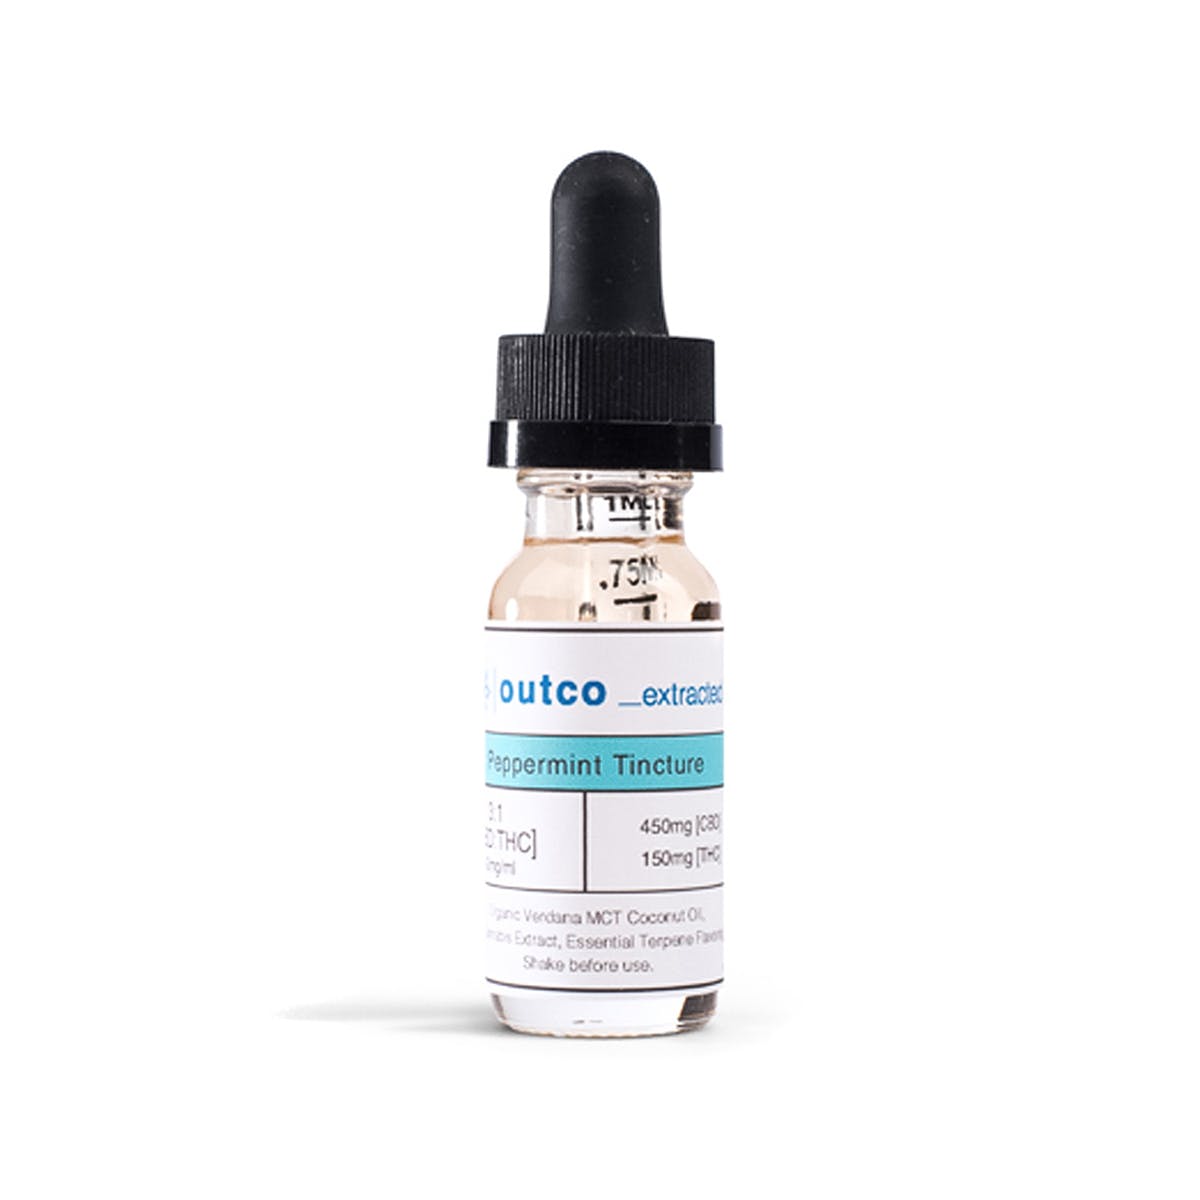 marijuana-dispensaries-west-coast-cannabis-club-in-cathedral-city-outco-peppermint-31-ratio-tincture